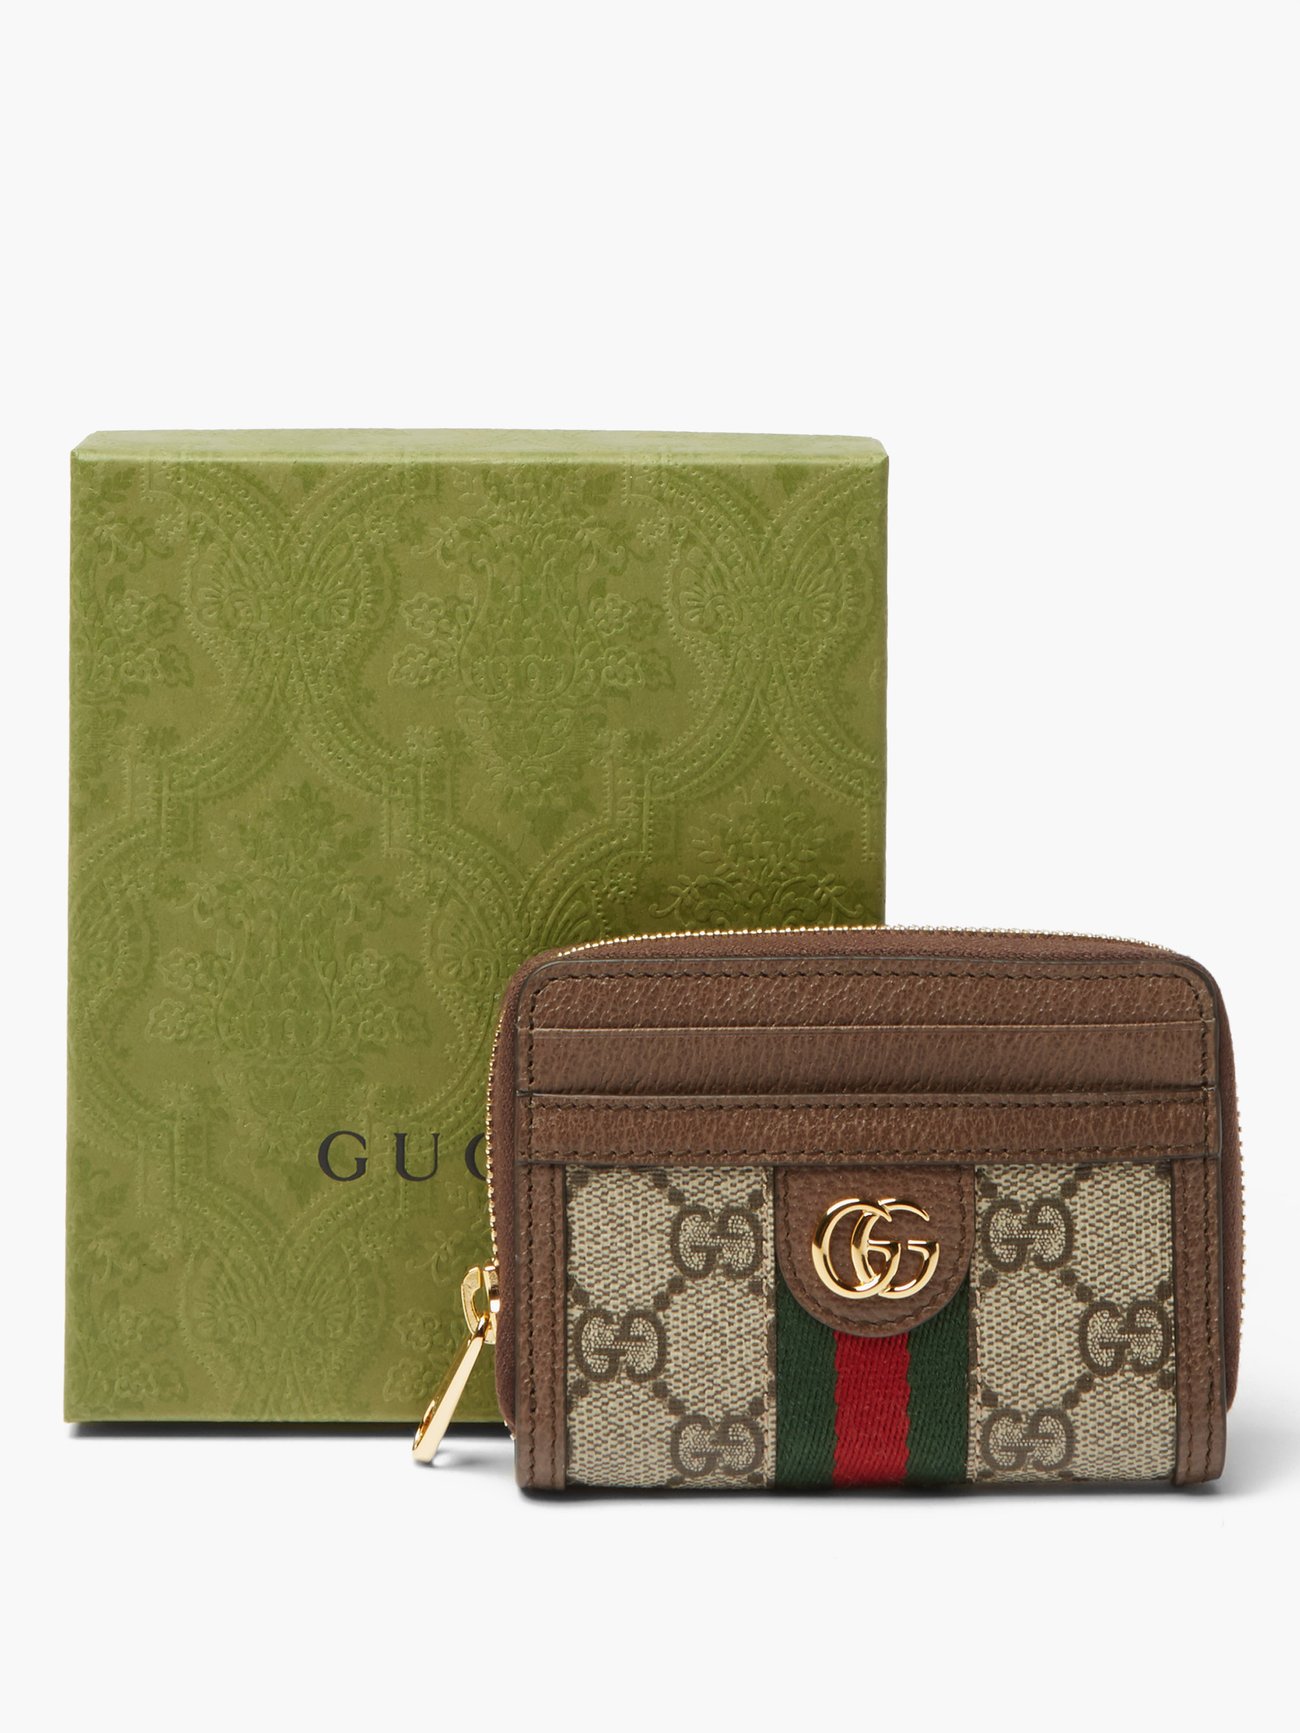 Gucci Ophidia GG Supreme Wallet